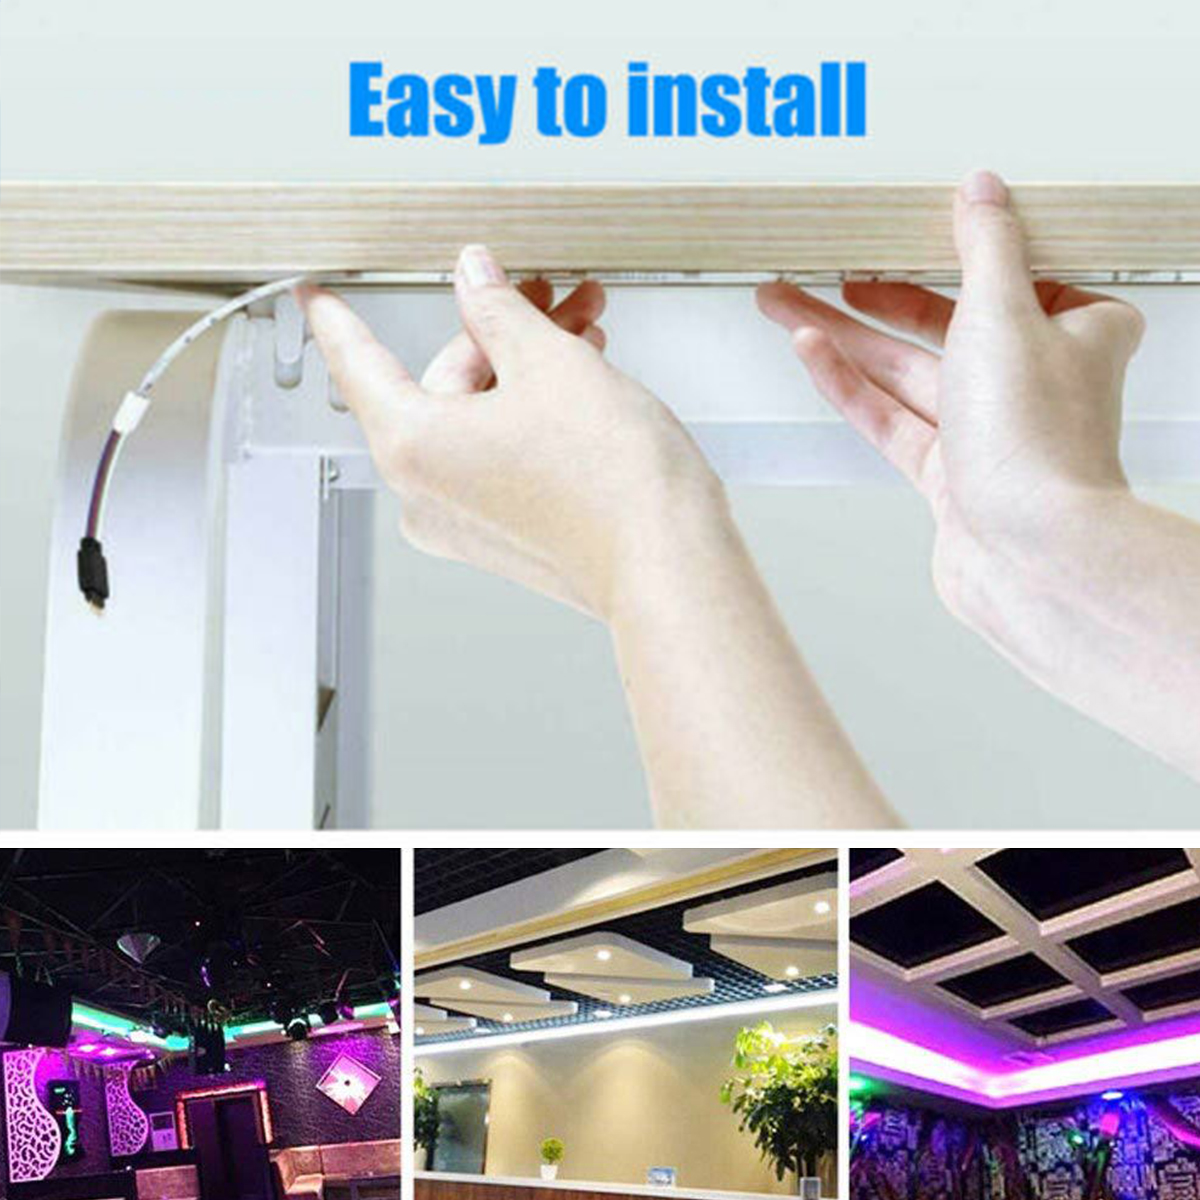 DC12V-3X5M10M-LED-Strip-Light-Non-waterproof-3528-RGB-Tape-Lamp-for-Room-TV-Party-Bar--Remote-Contro-1729474-8